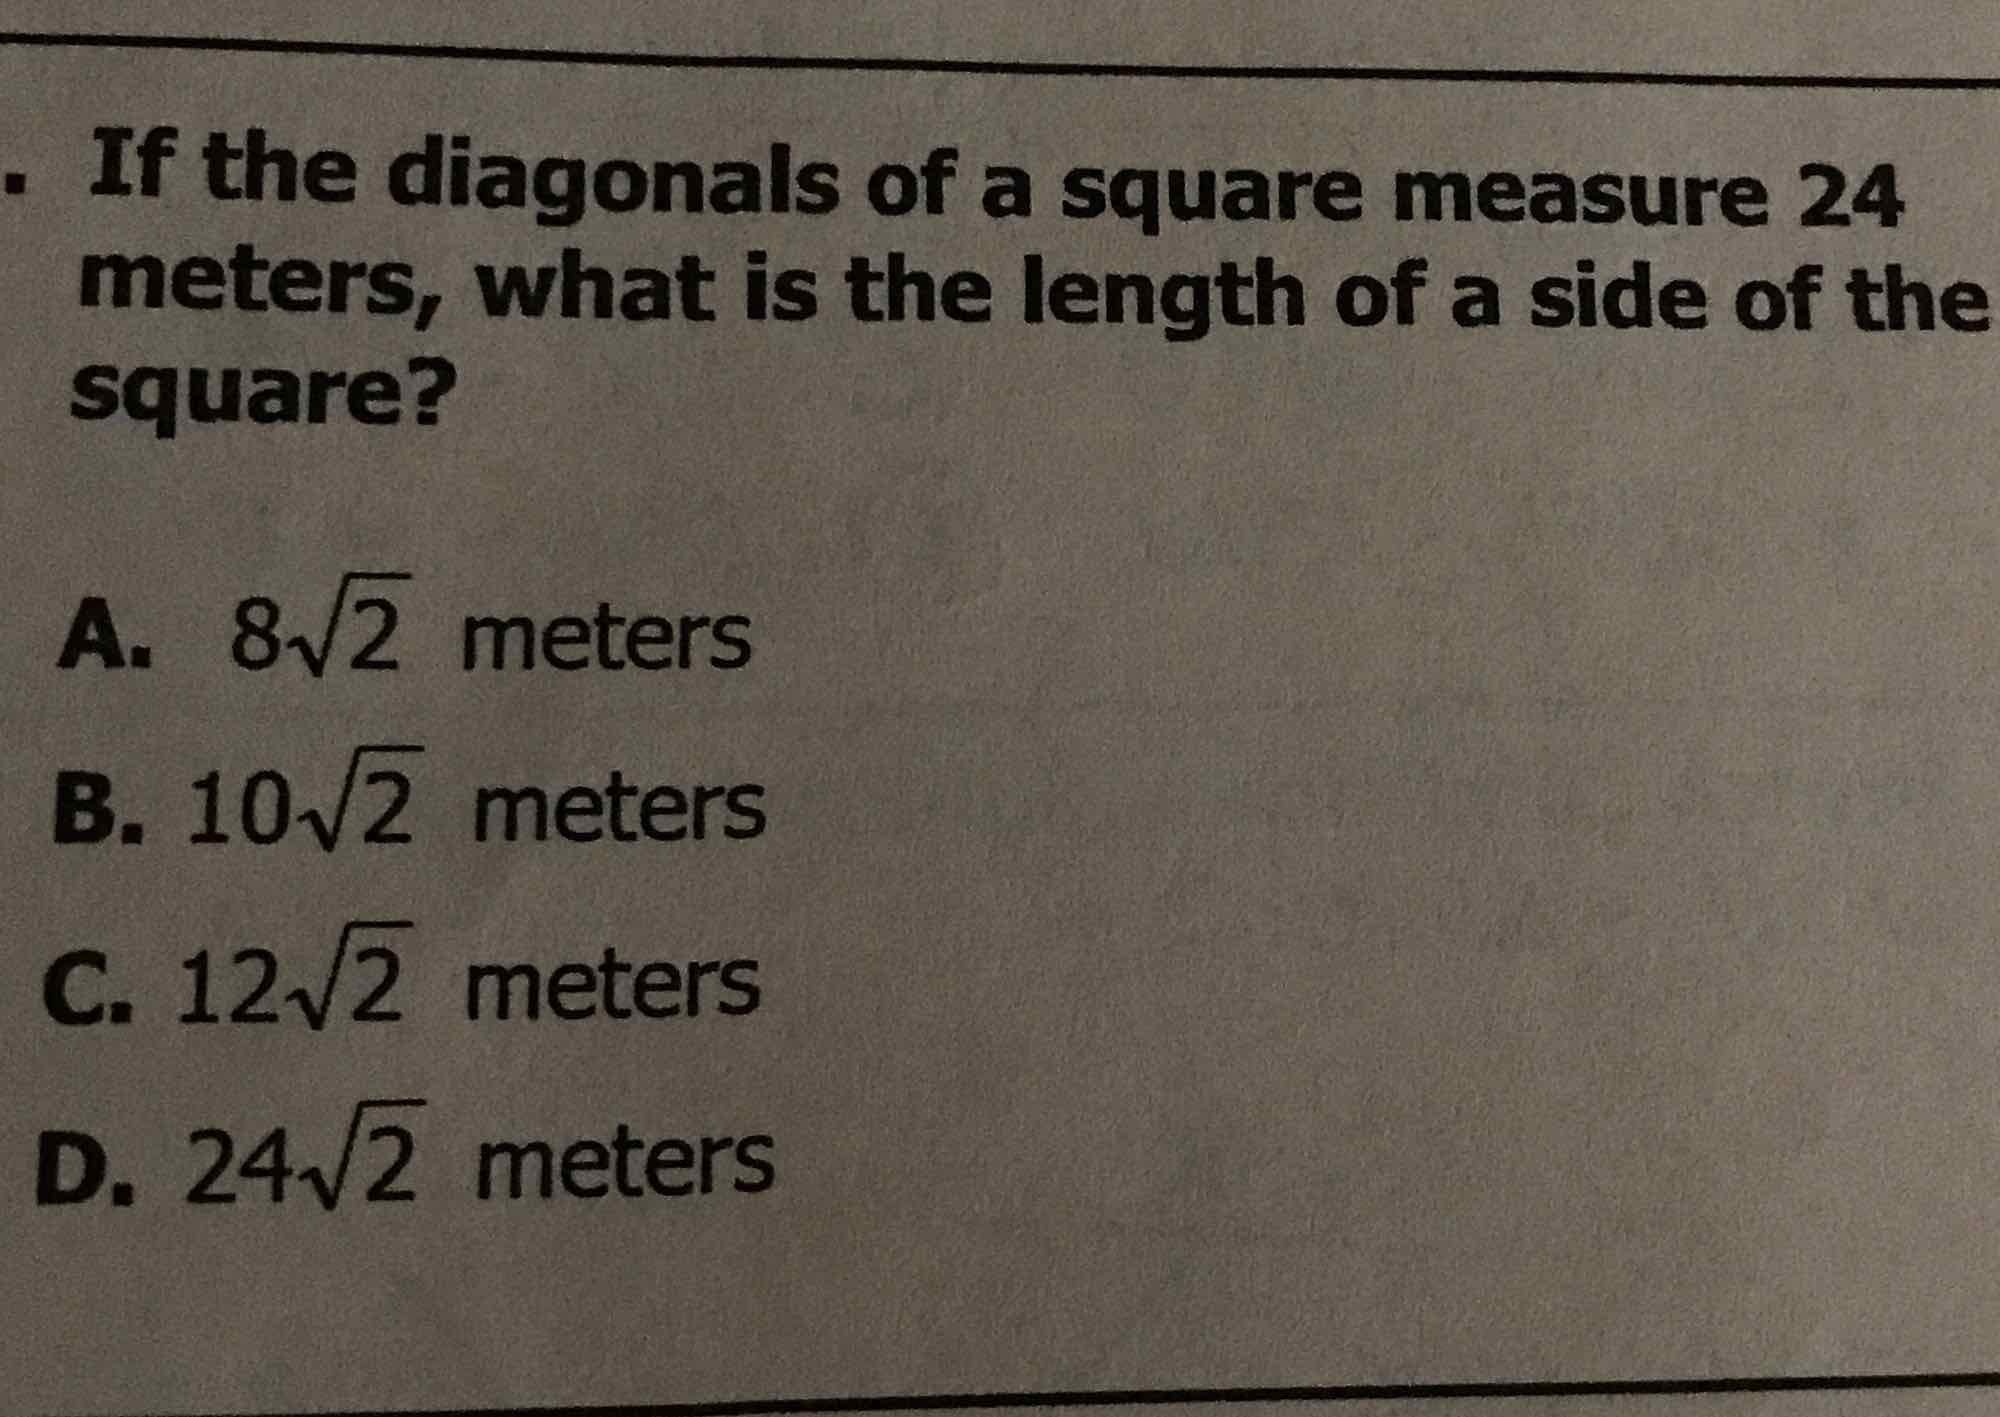 If the diagonals of a square measure 24 meters, what is the length of a side of the square?
A. \( 8 \sqrt{2} \) meters
B. \( 10 \sqrt{2} \) meters
C. \( 12 \sqrt{2} \) meters
D. \( 24 \sqrt{2} \) meters